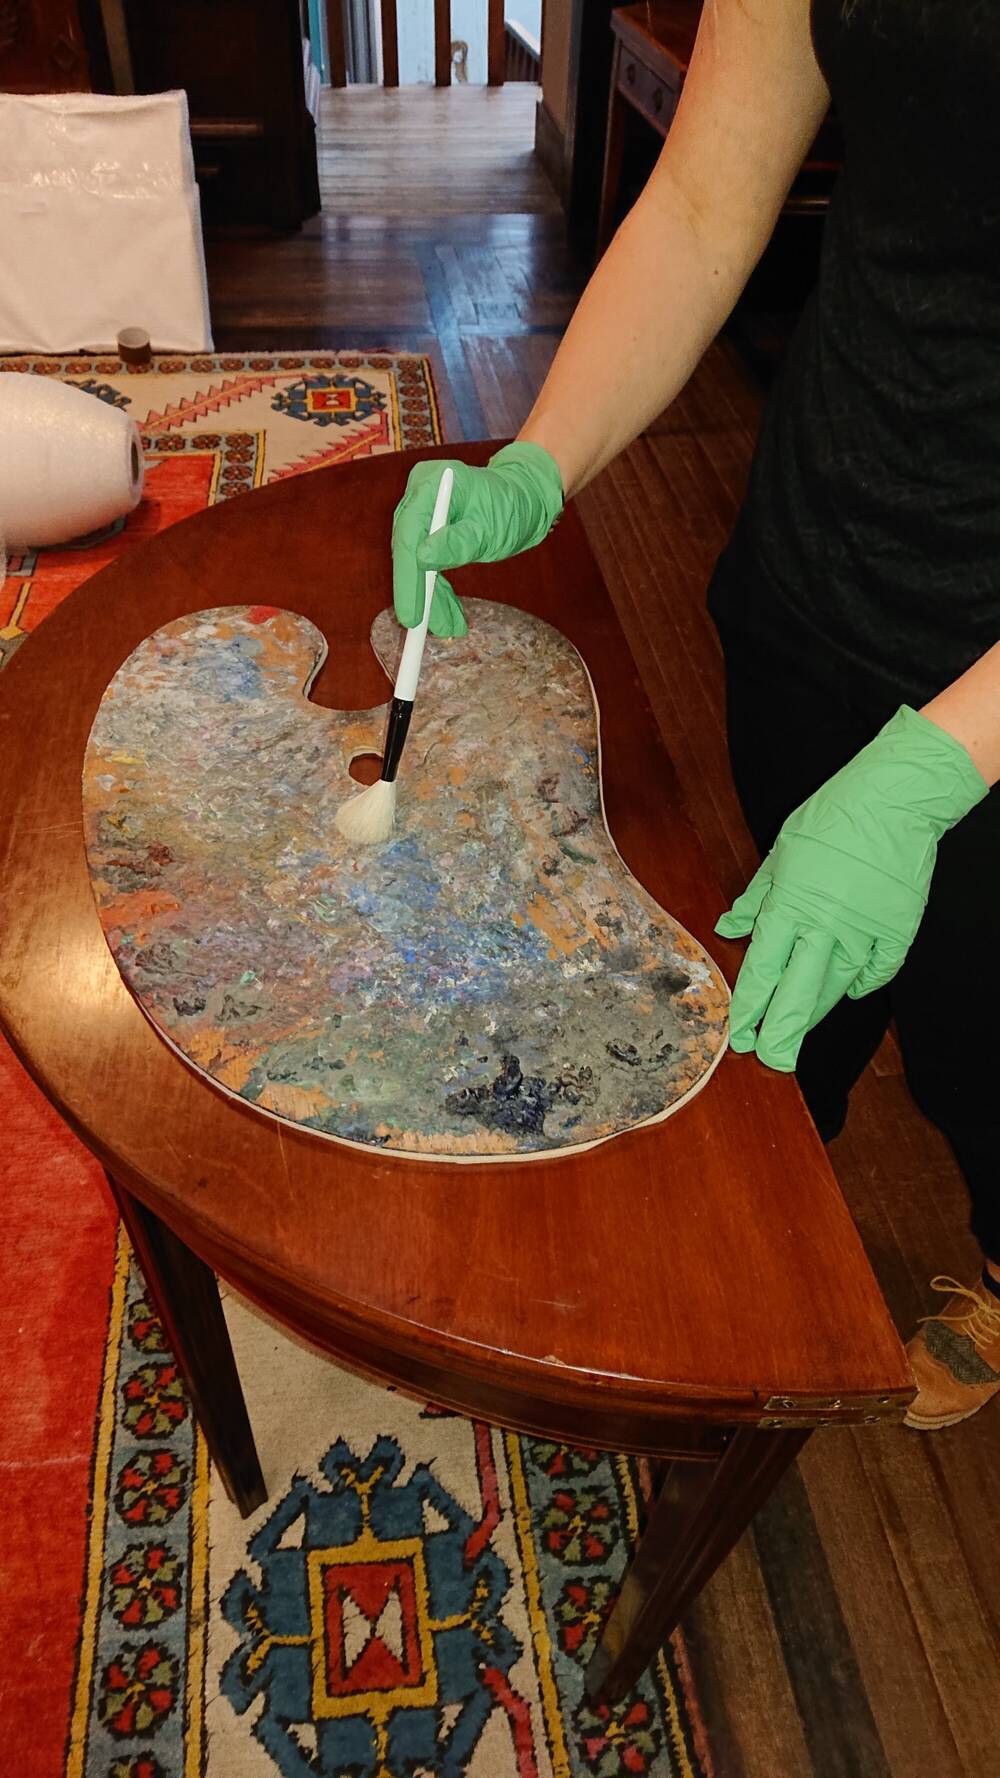 A painter’s palette on a wooden table. Someone wearing green latex gloves is carefully using a brush to clean the surface of the palette.